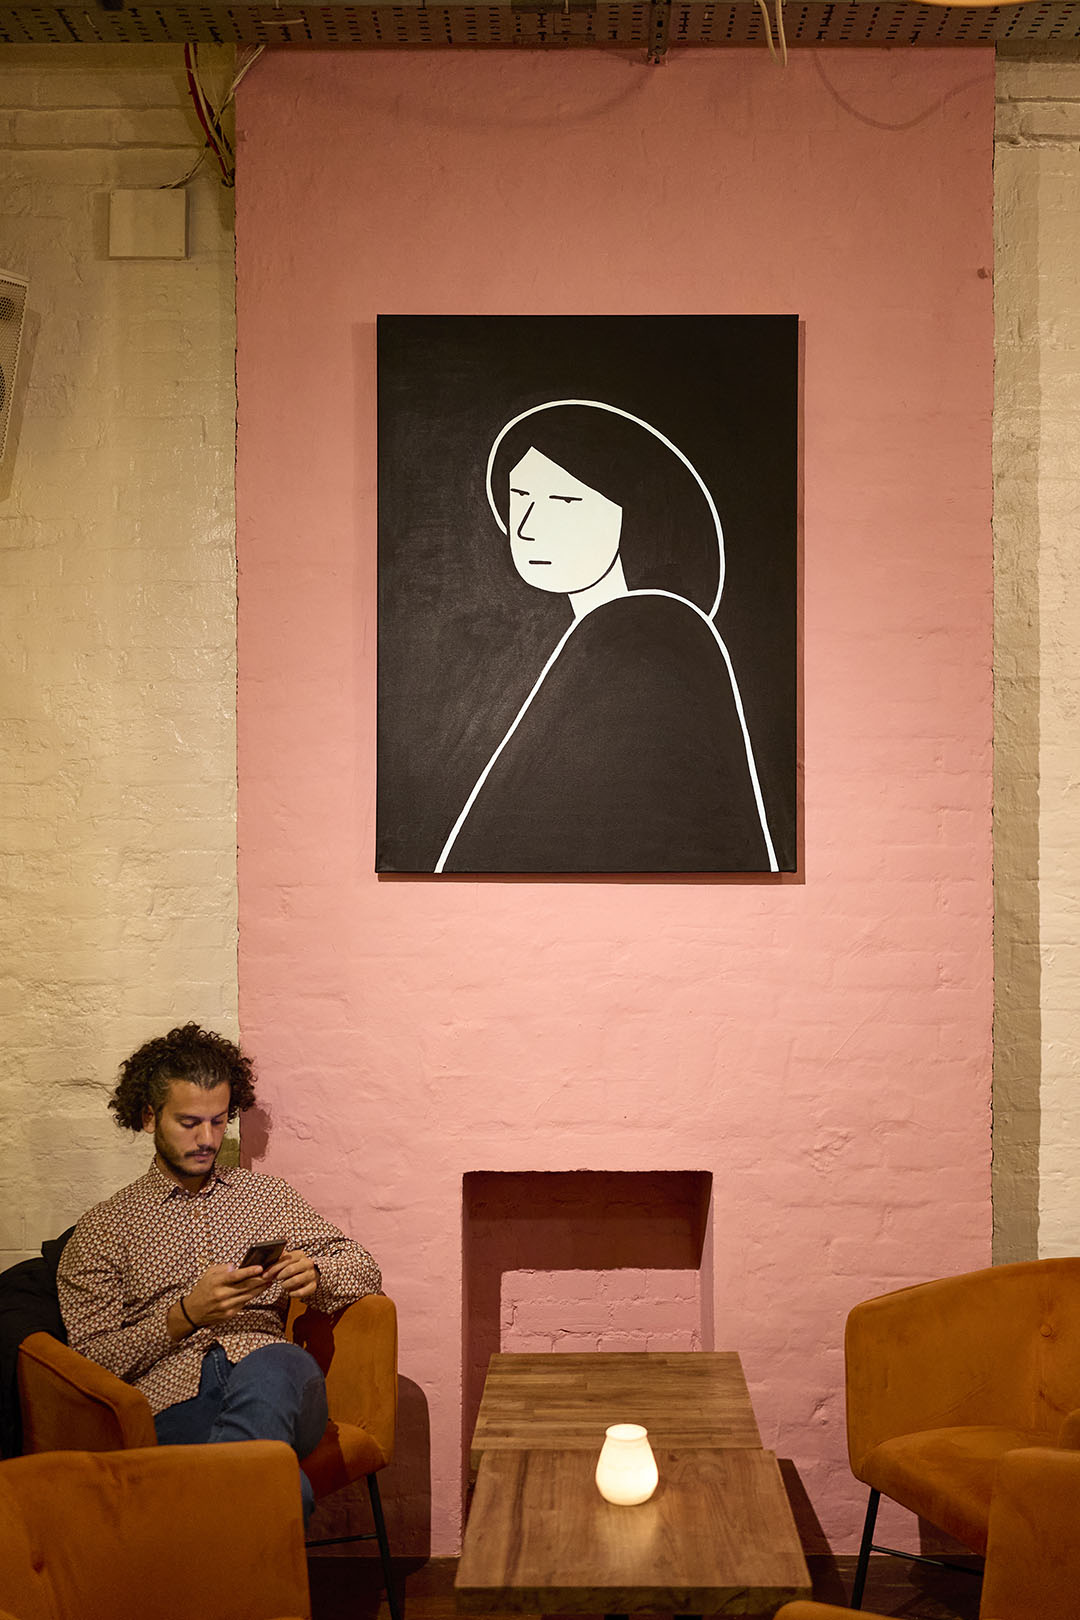 Oil painting of a black and white figure by artist Ana Curbelo is hung on a pink wall over a man sat underneath looking at his phone.